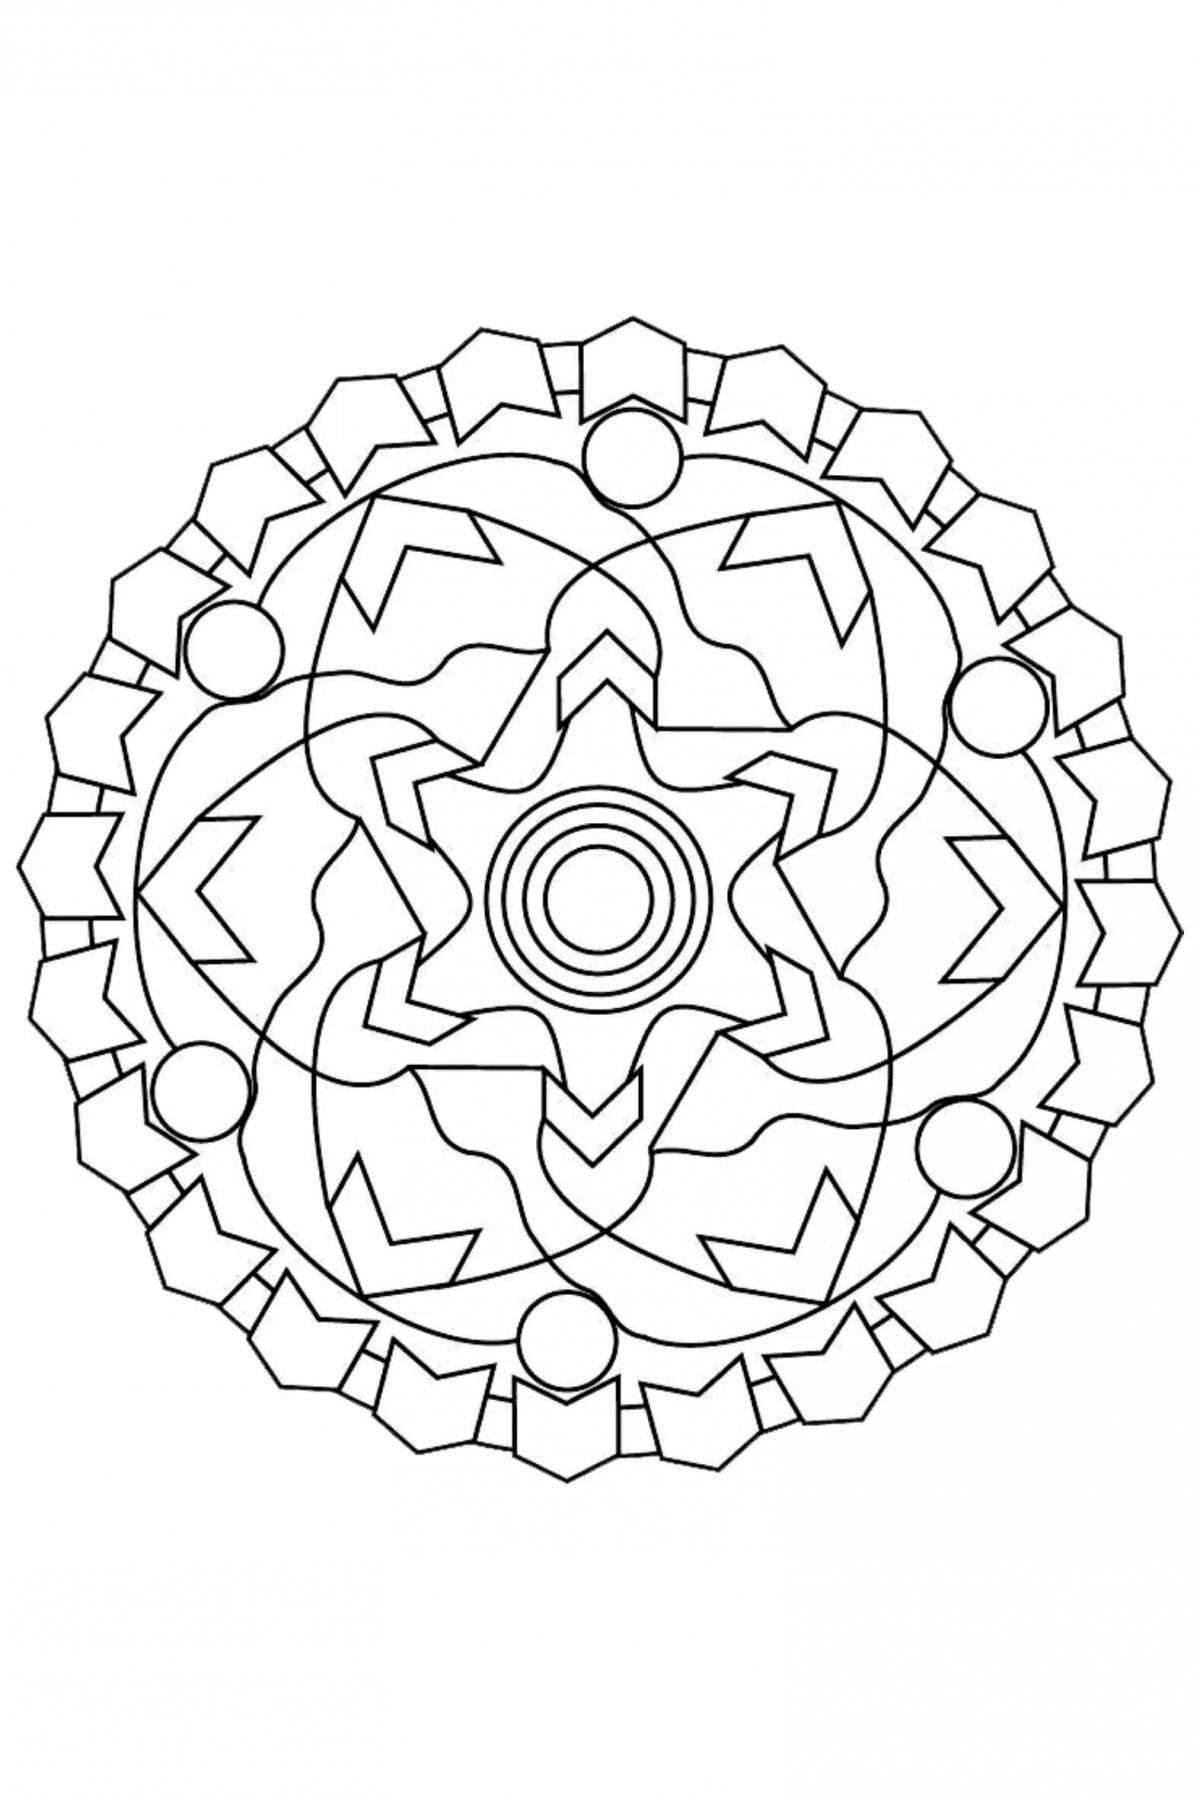 Значение мандалы sublime coloring page